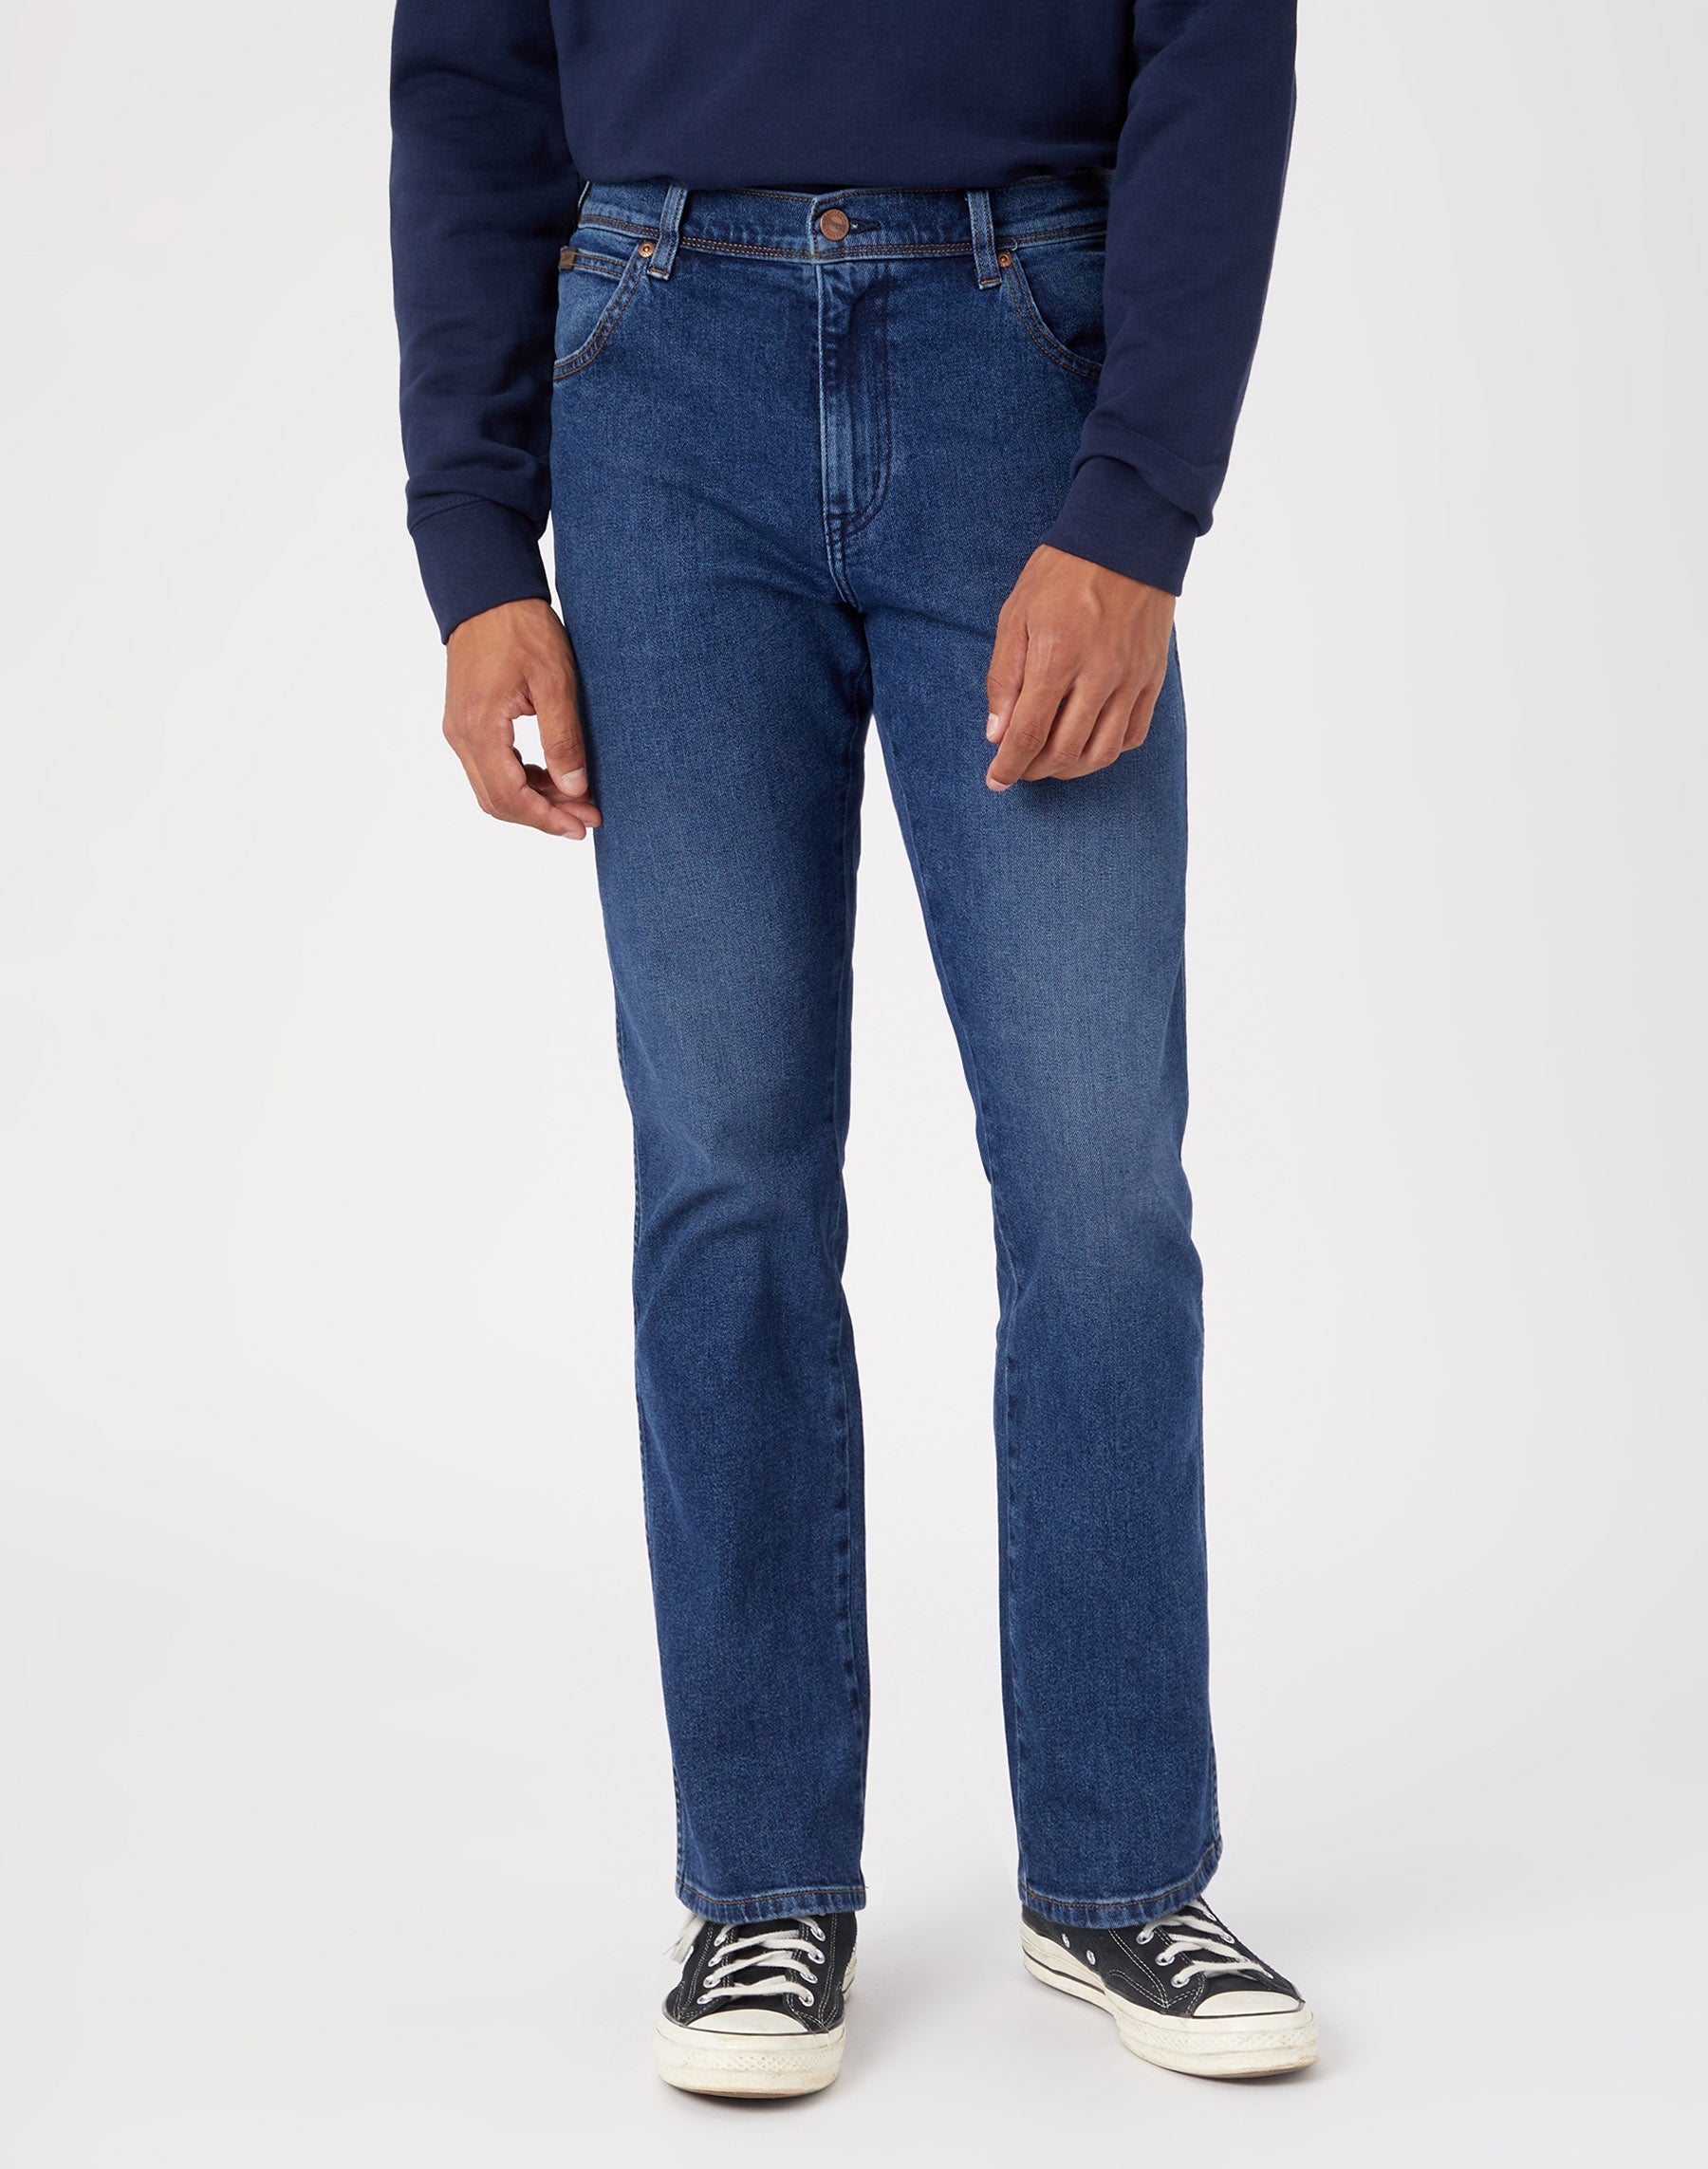 Texas Low Stretch in The Rock Jeans Wrangler   